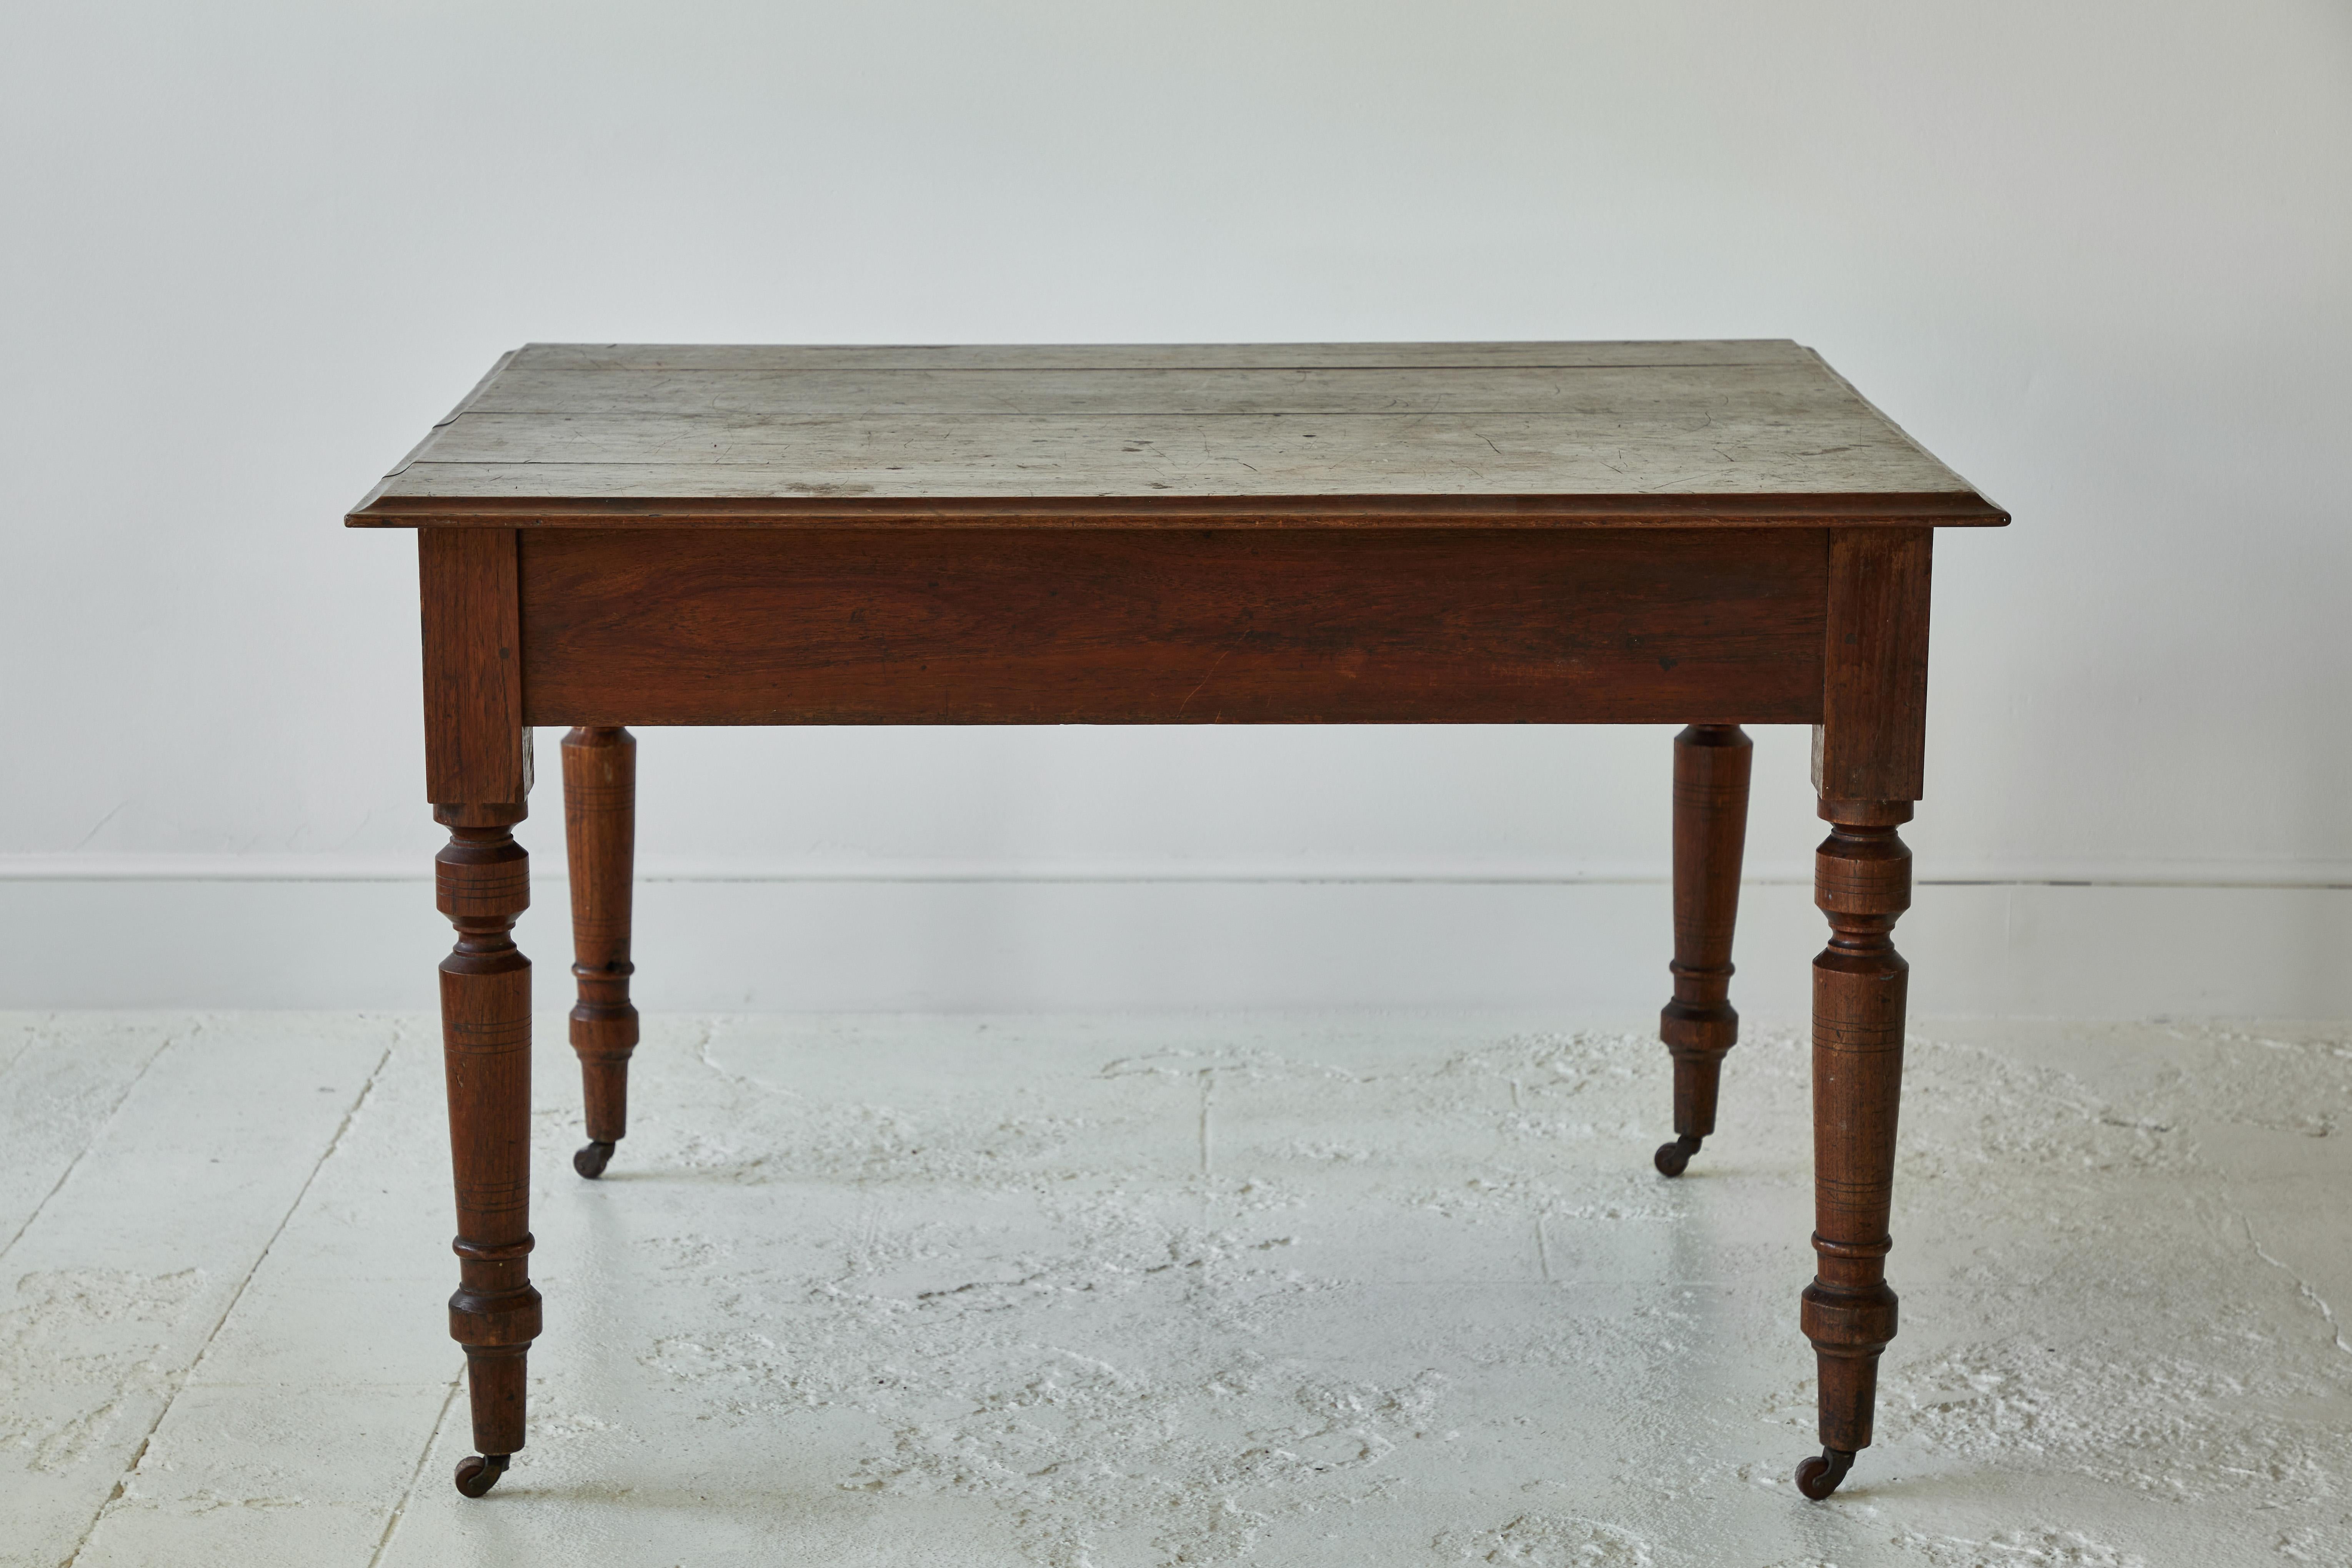 French square dark stained table with turned legs on casters.